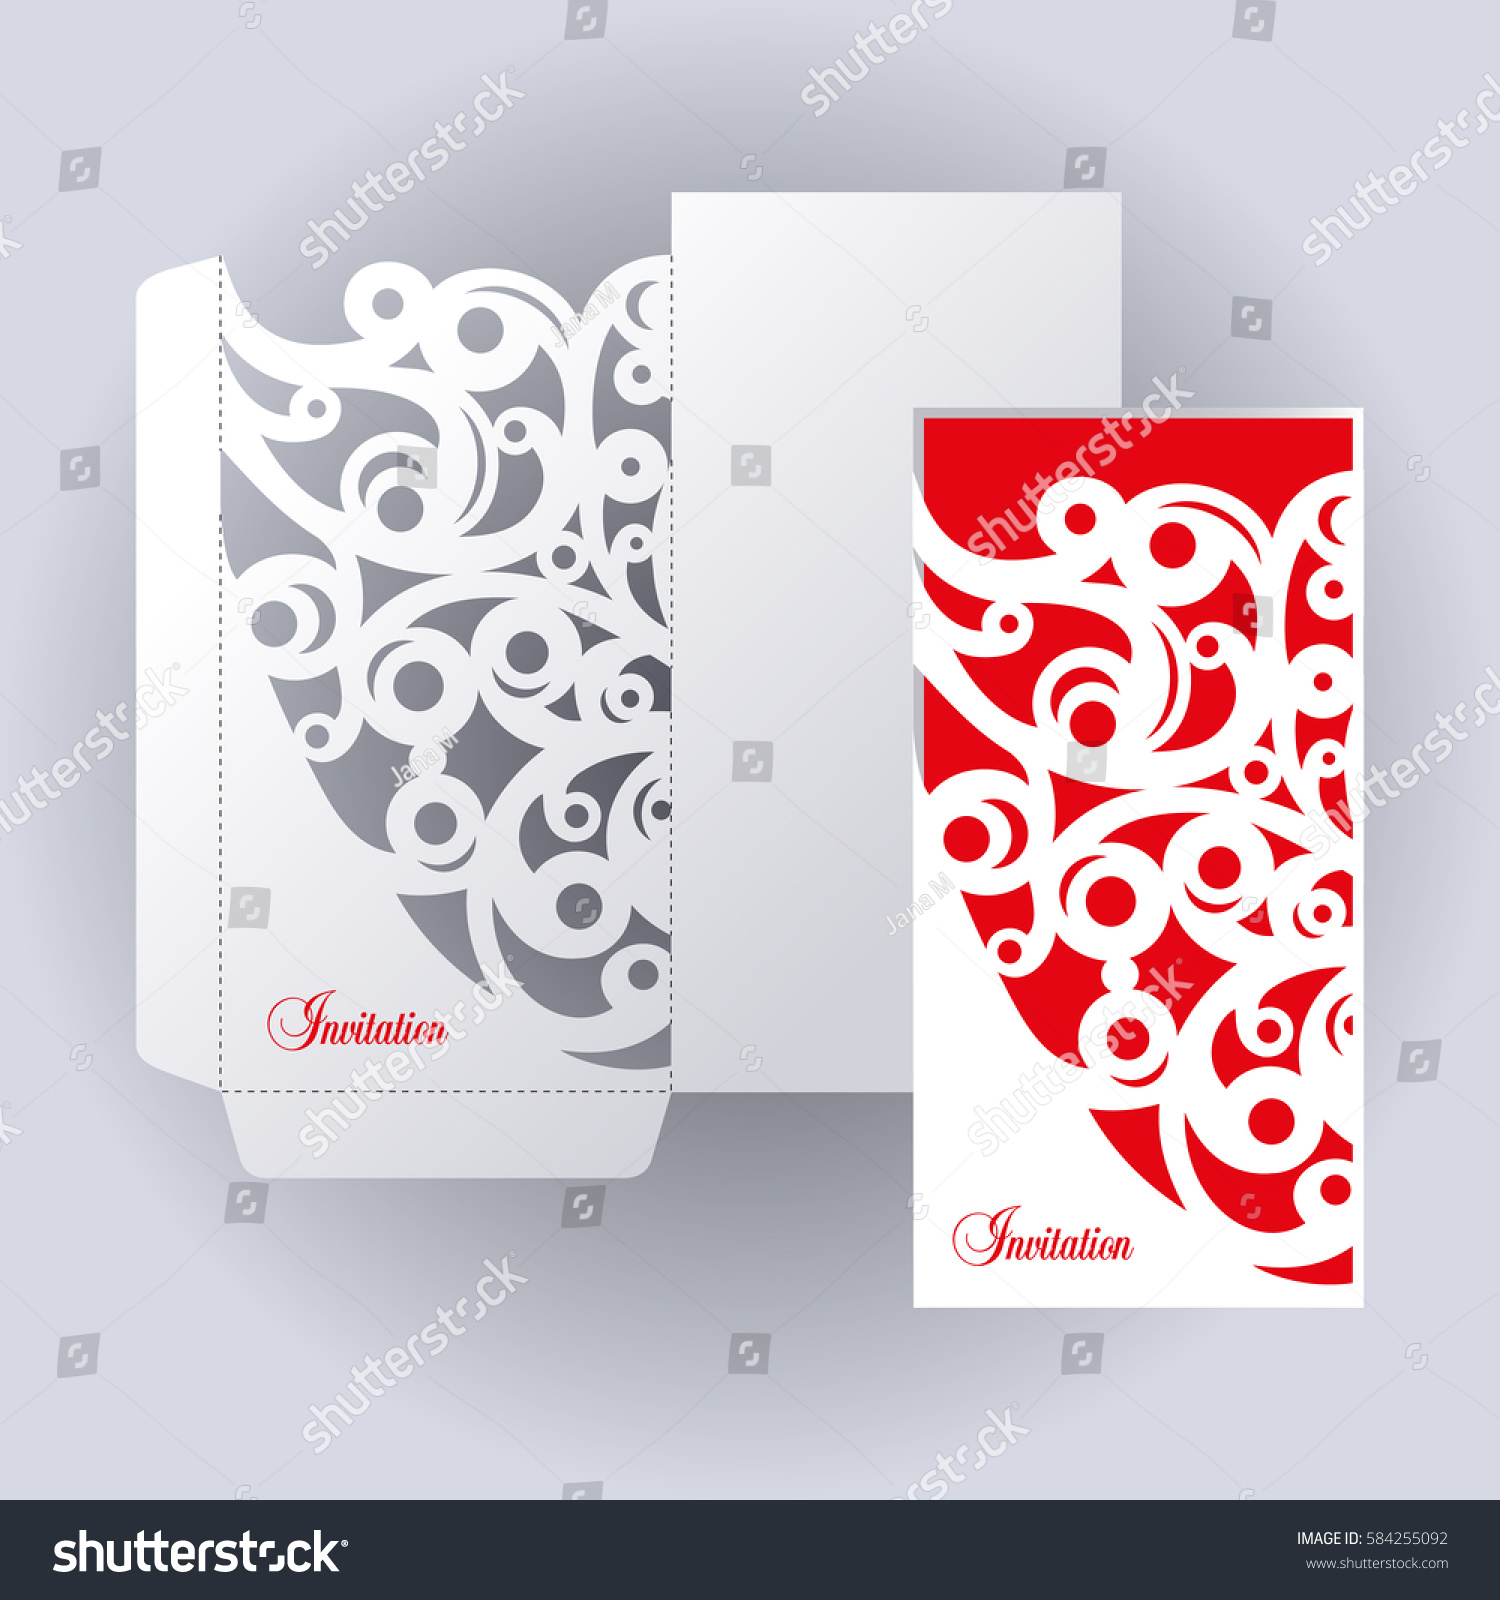 Laser Cutting Template Cover Wedding Design Stock Vector